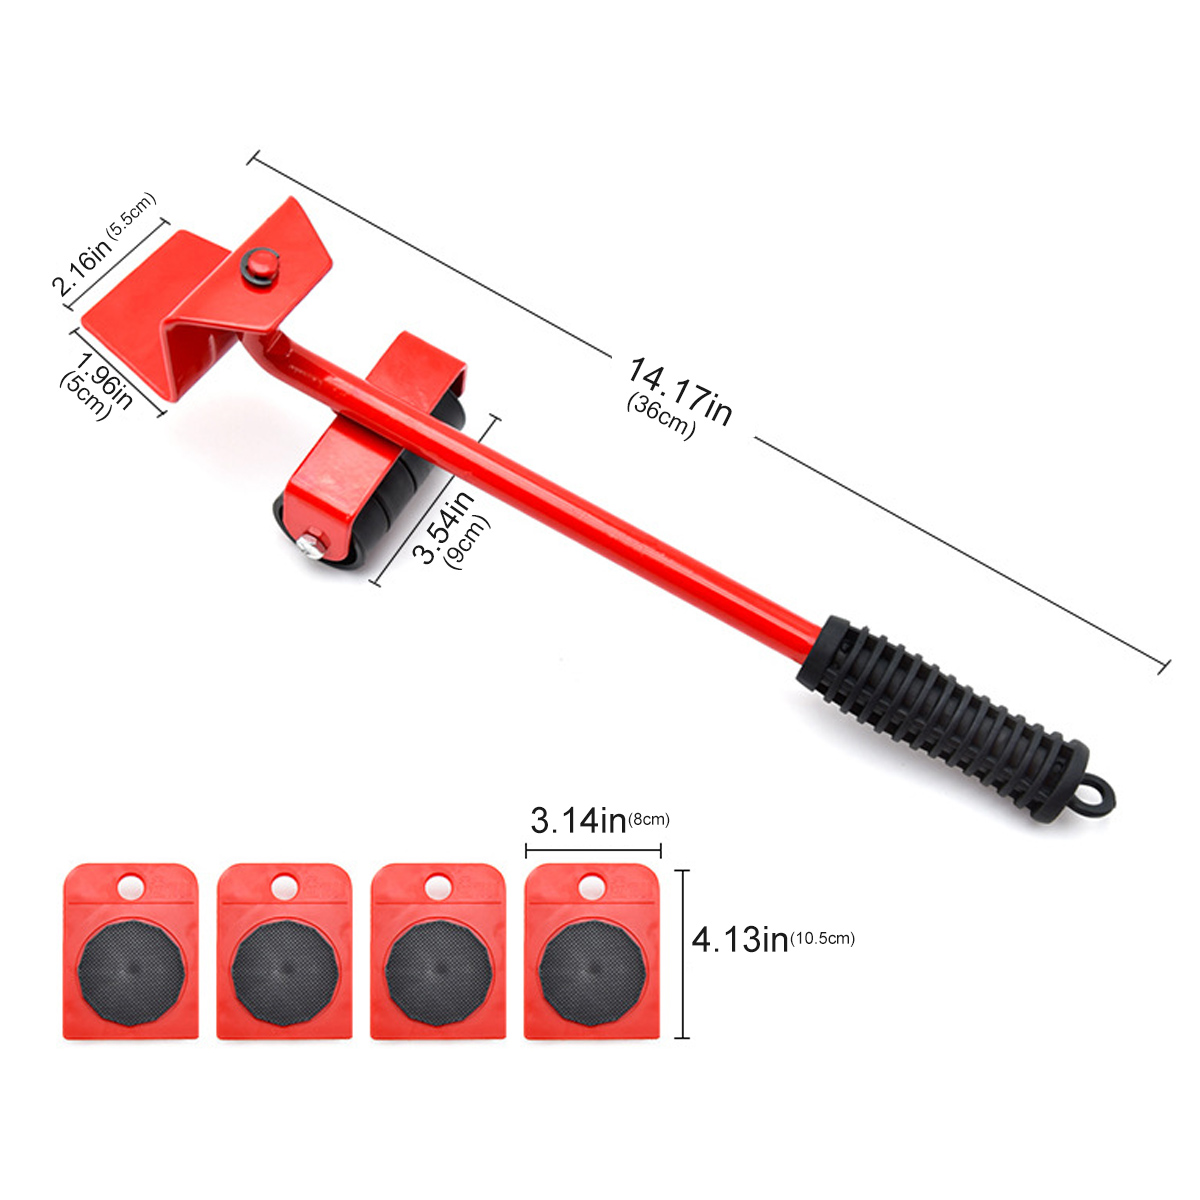 5PCS-Furniture-Lifter-Easy-Moving-Sliders-Mover-Tool-Set-Roller-Move-Tools-1849086-4